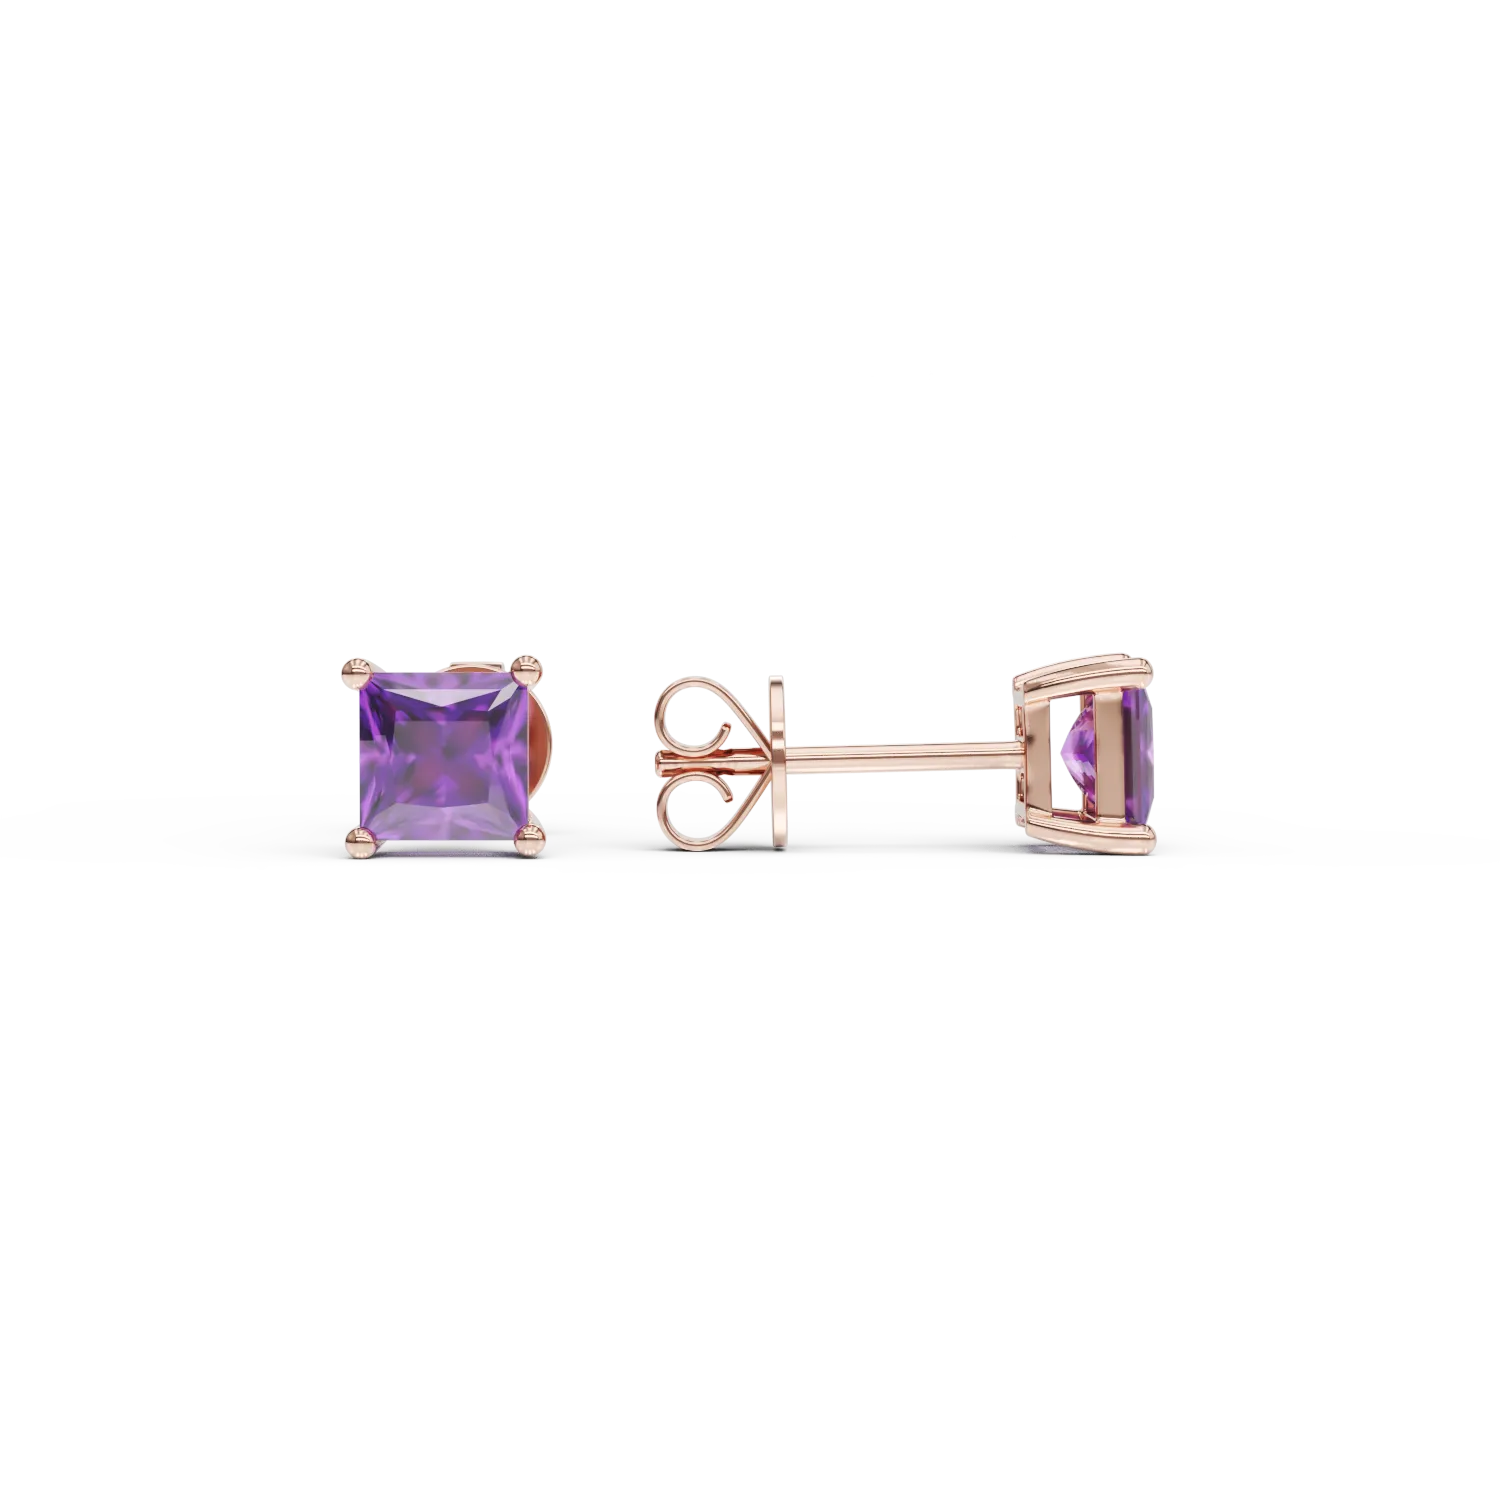 14K rose gold earrings with 0.61ct amethysts